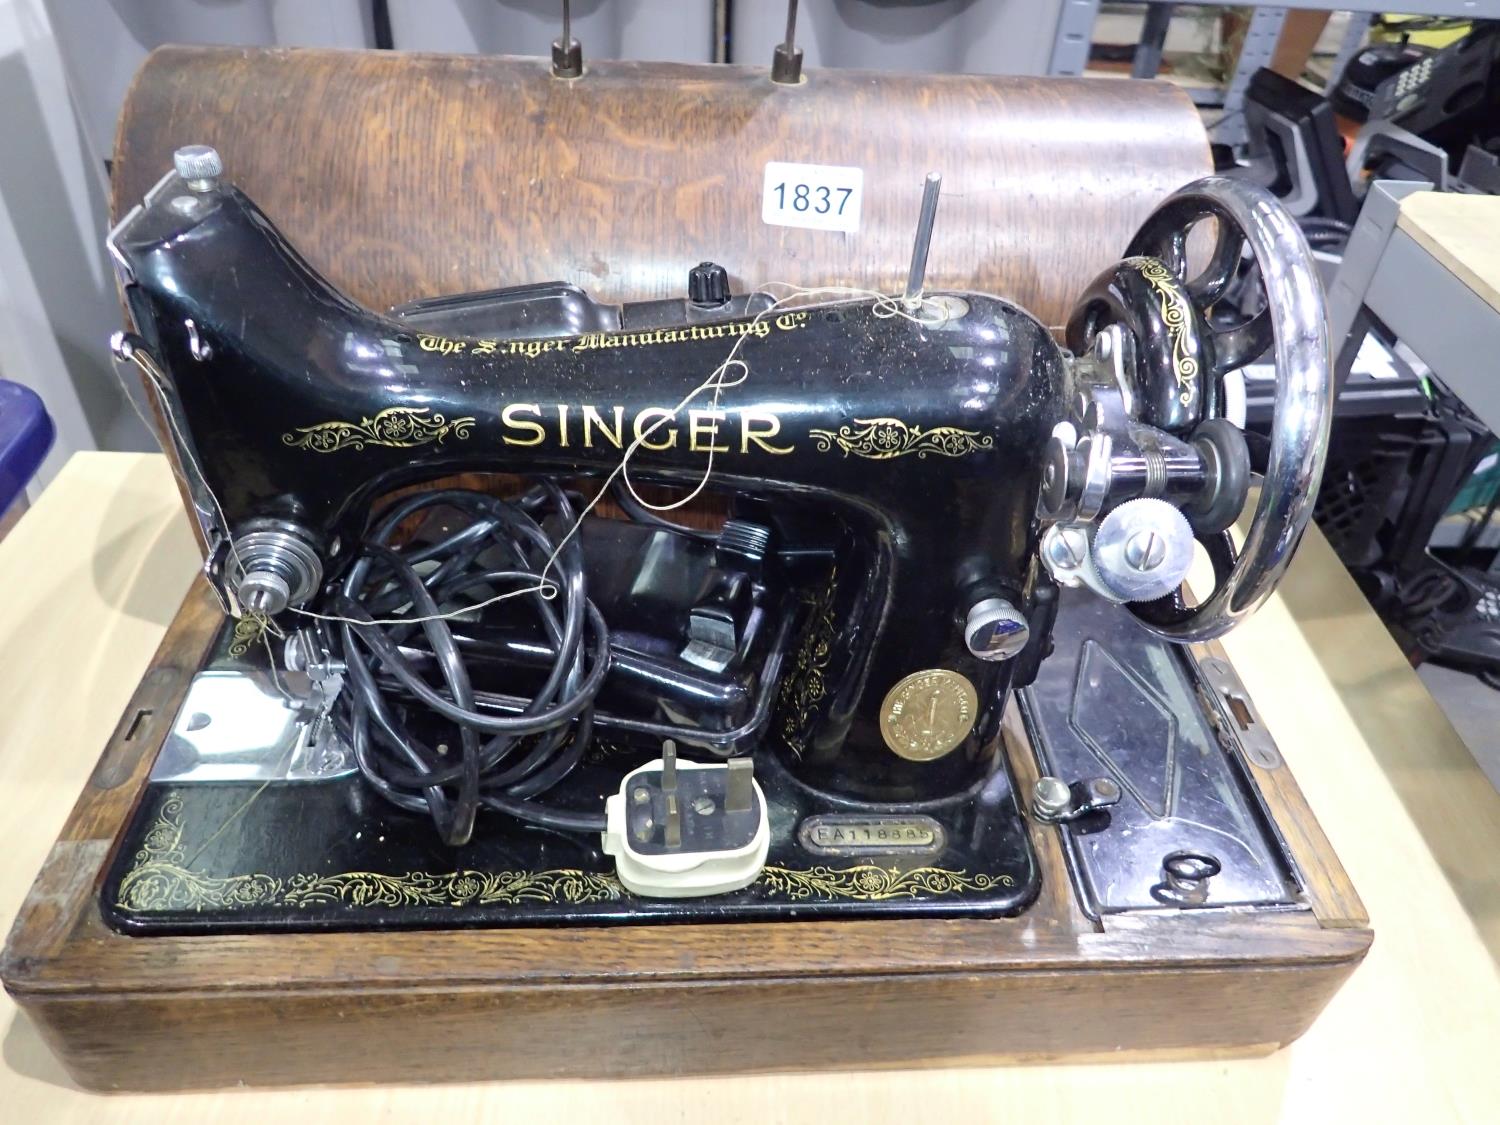 Oak cased Singer sewing machine. Not available for in-house P&P